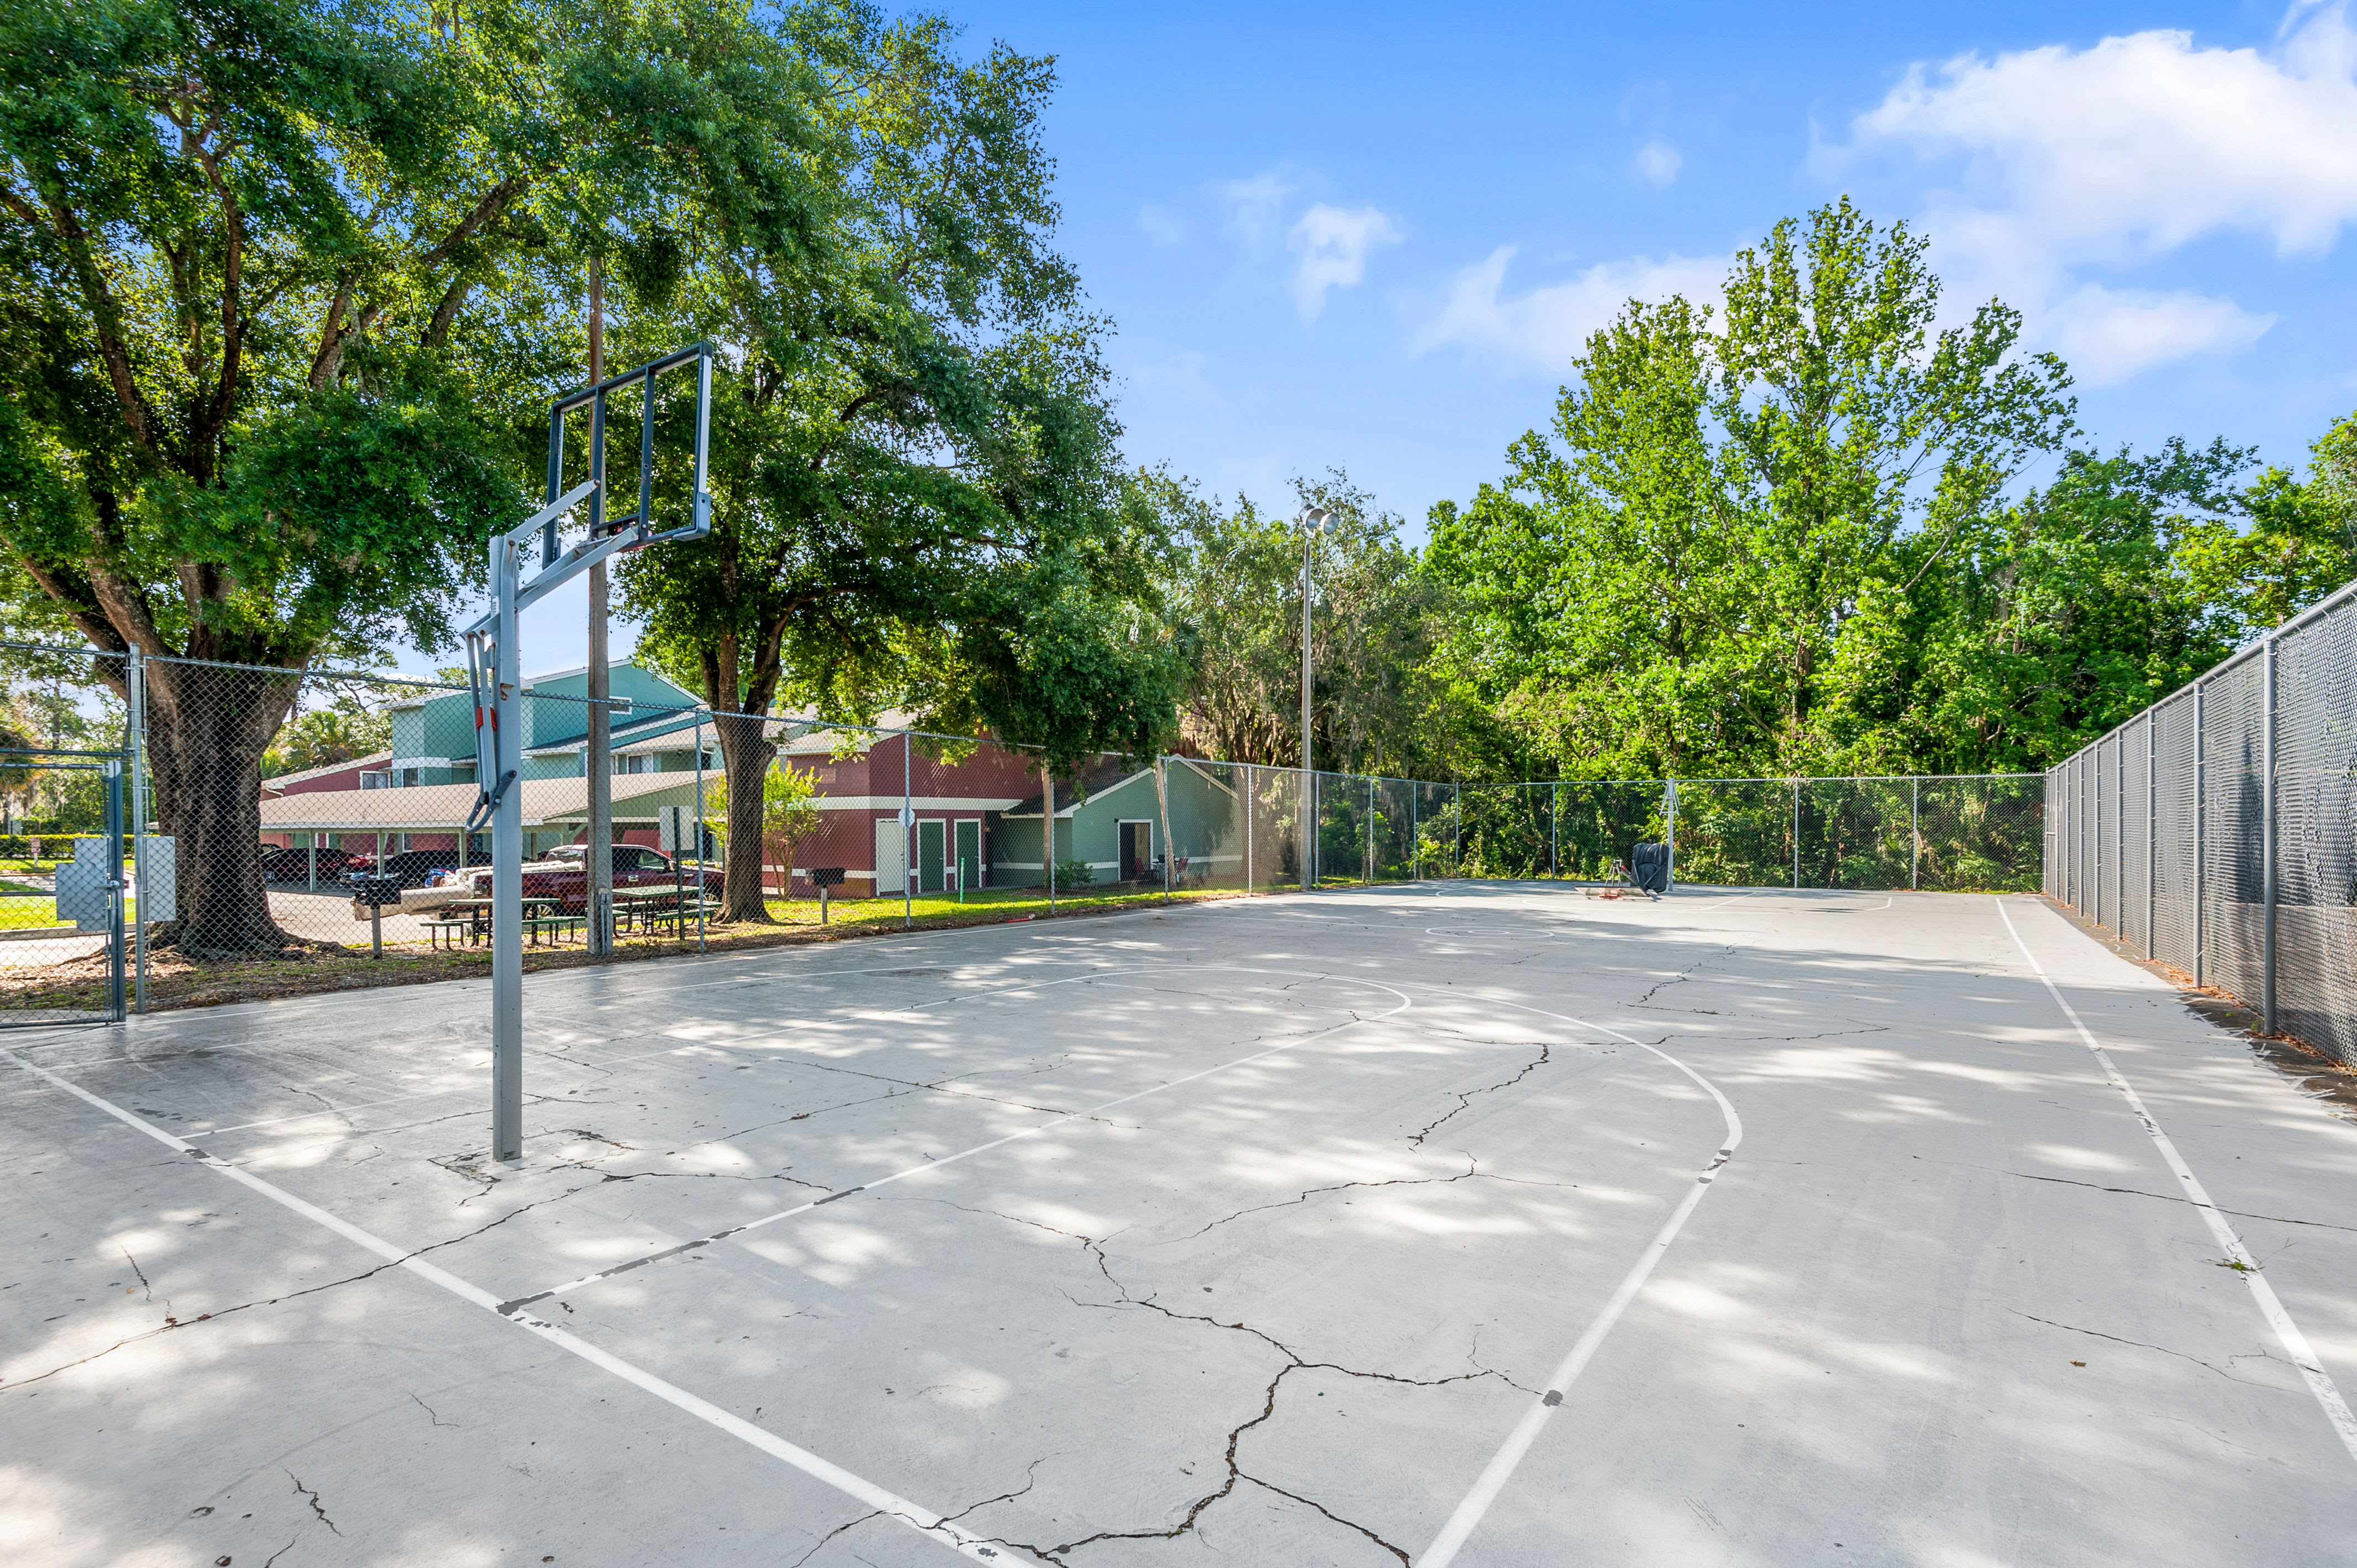 View amenities like our basketball court at Altamonte Springs, Florida